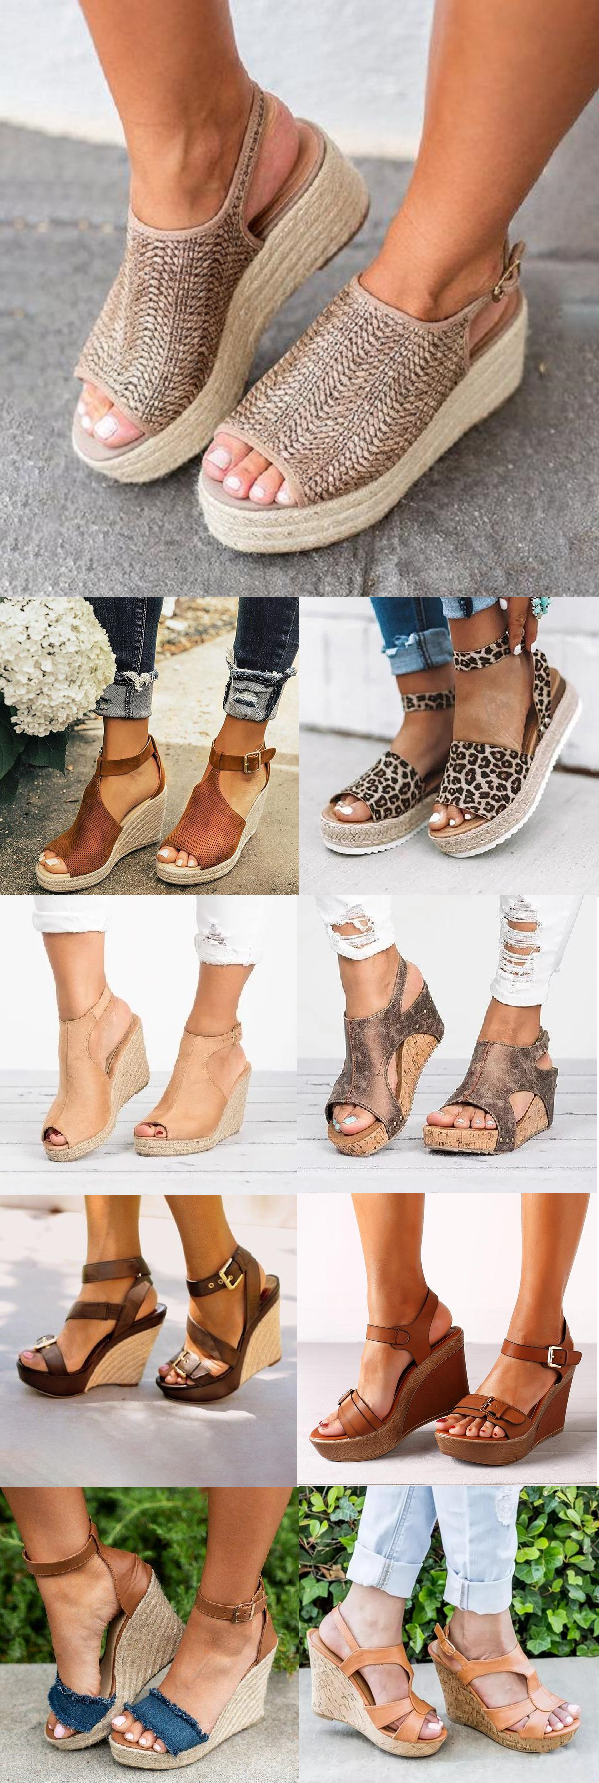 SHOP NOW>>Hot Summer #Wedge Sandals for You.Up to 68% OFF! Buy More Save More!Shop Now! -   13 gigi hadid summer style
 ideas